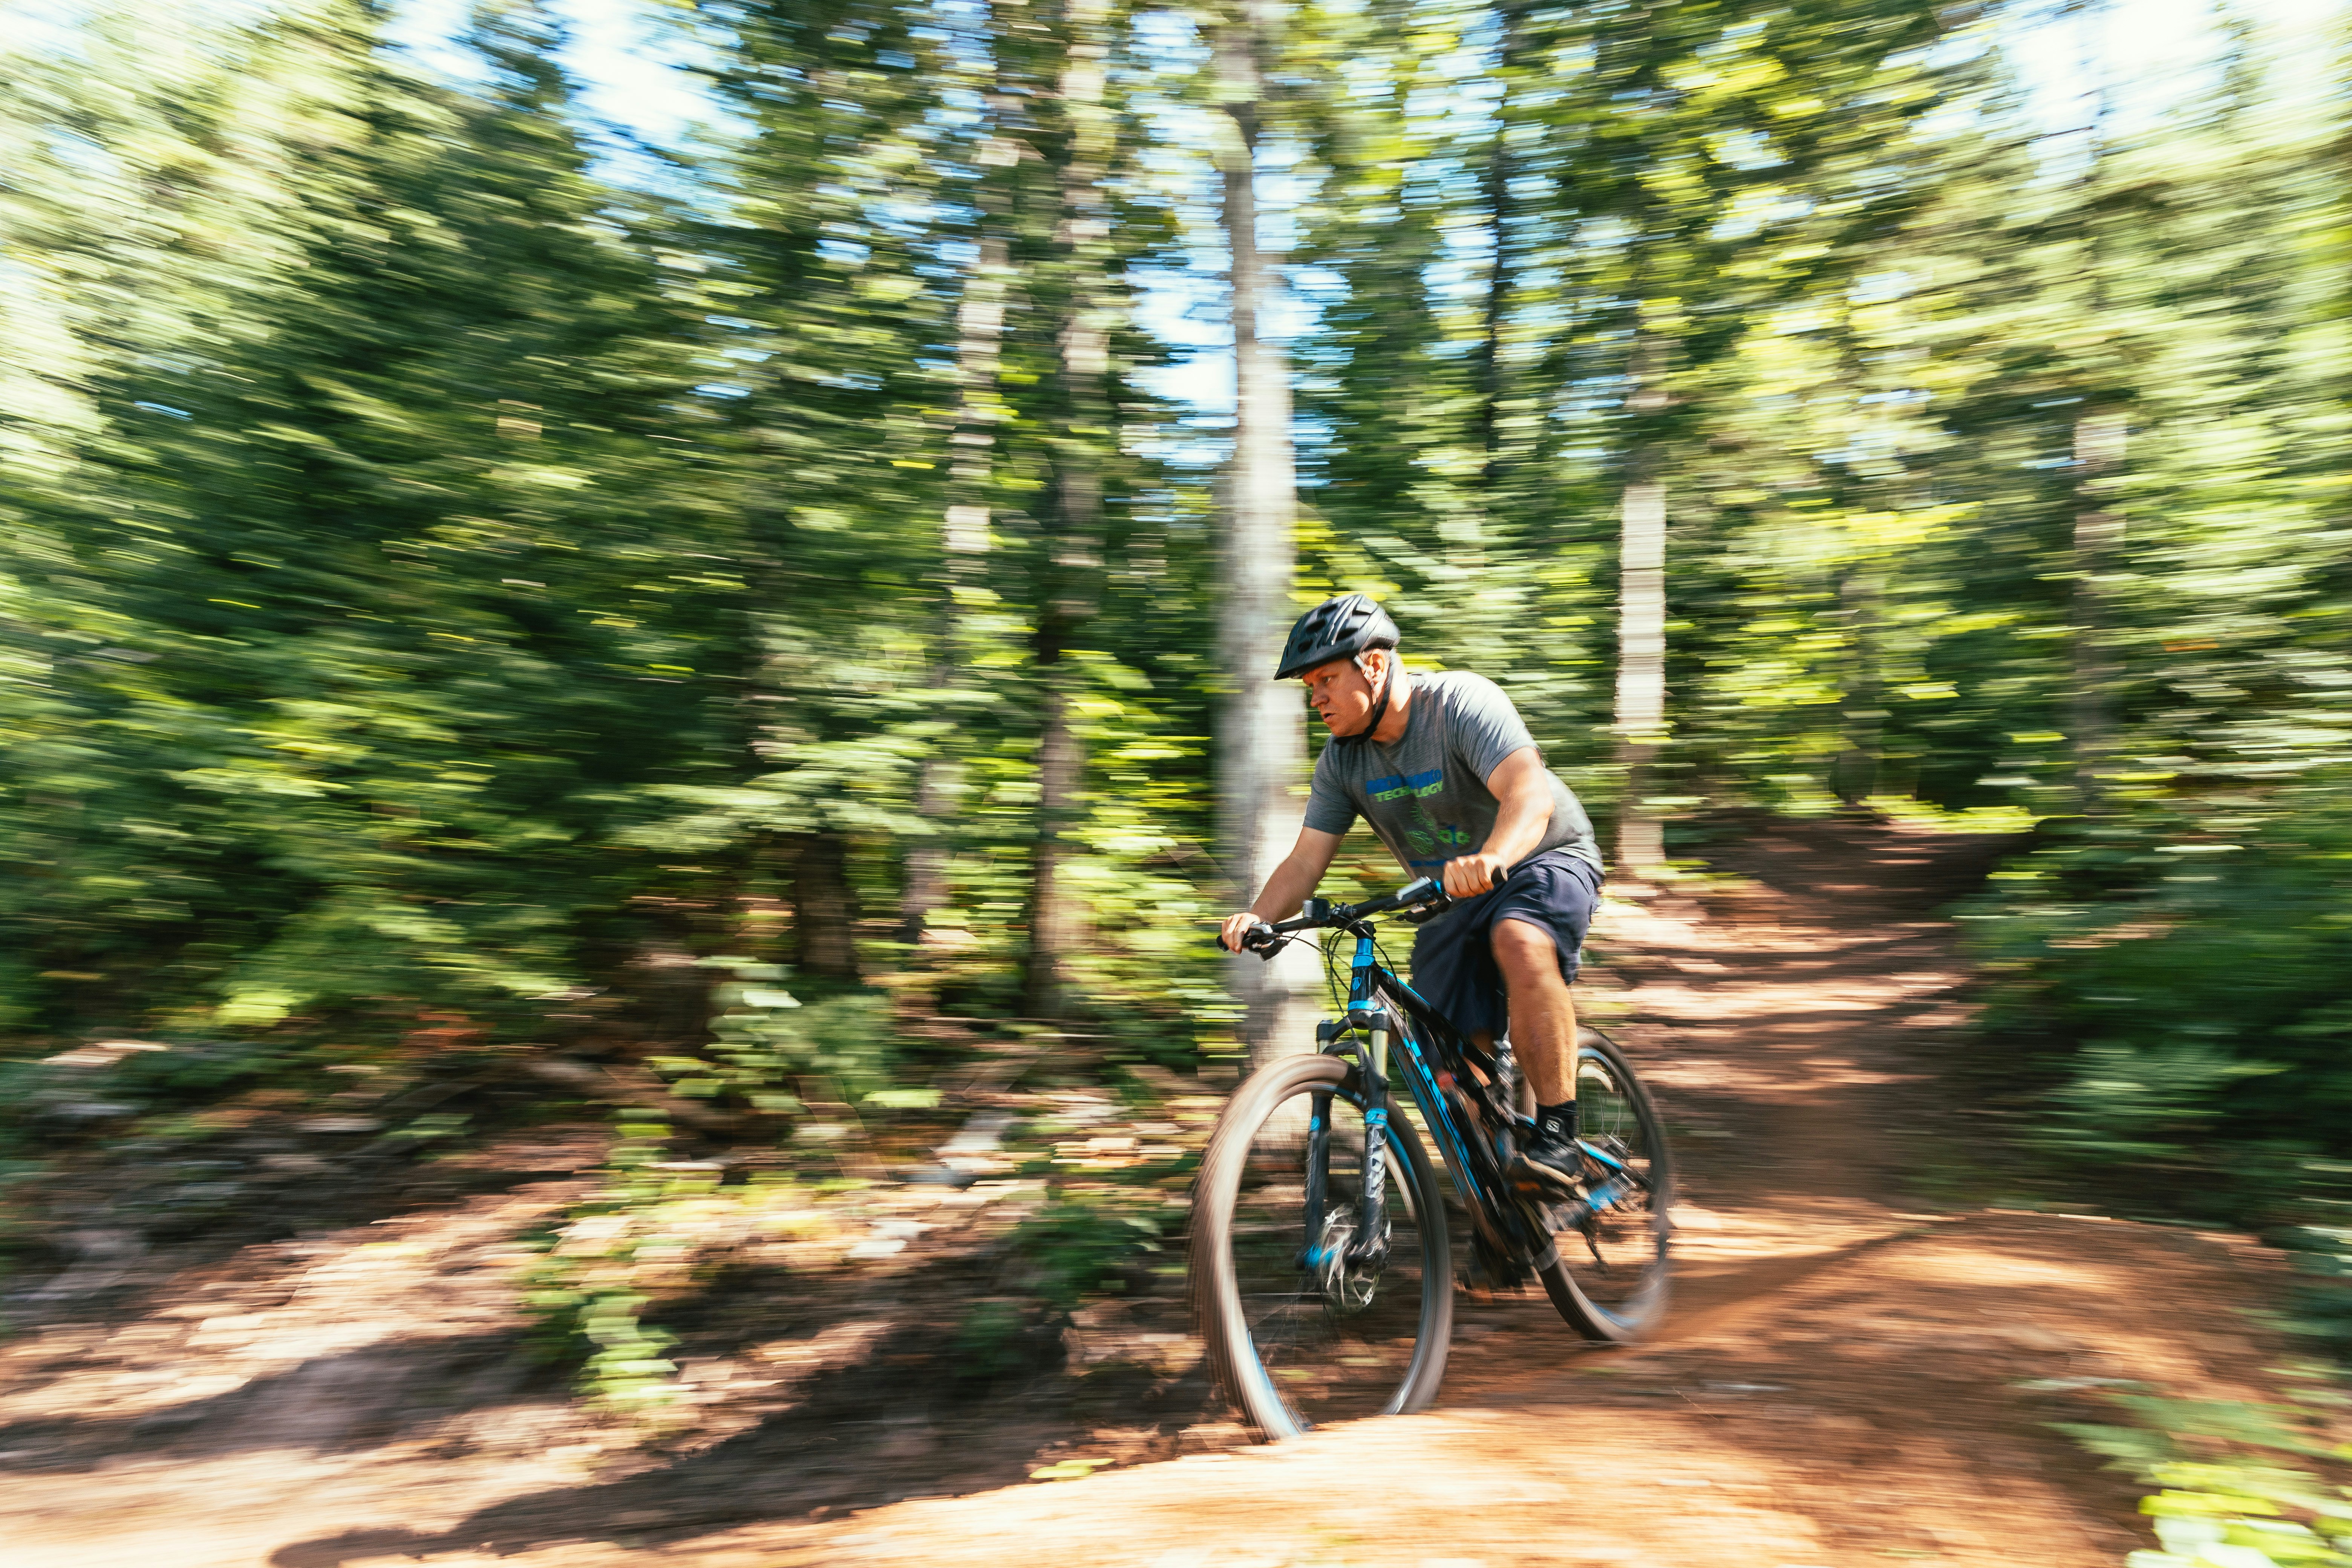 man in green shirt riding on bicycle in forest during daytime